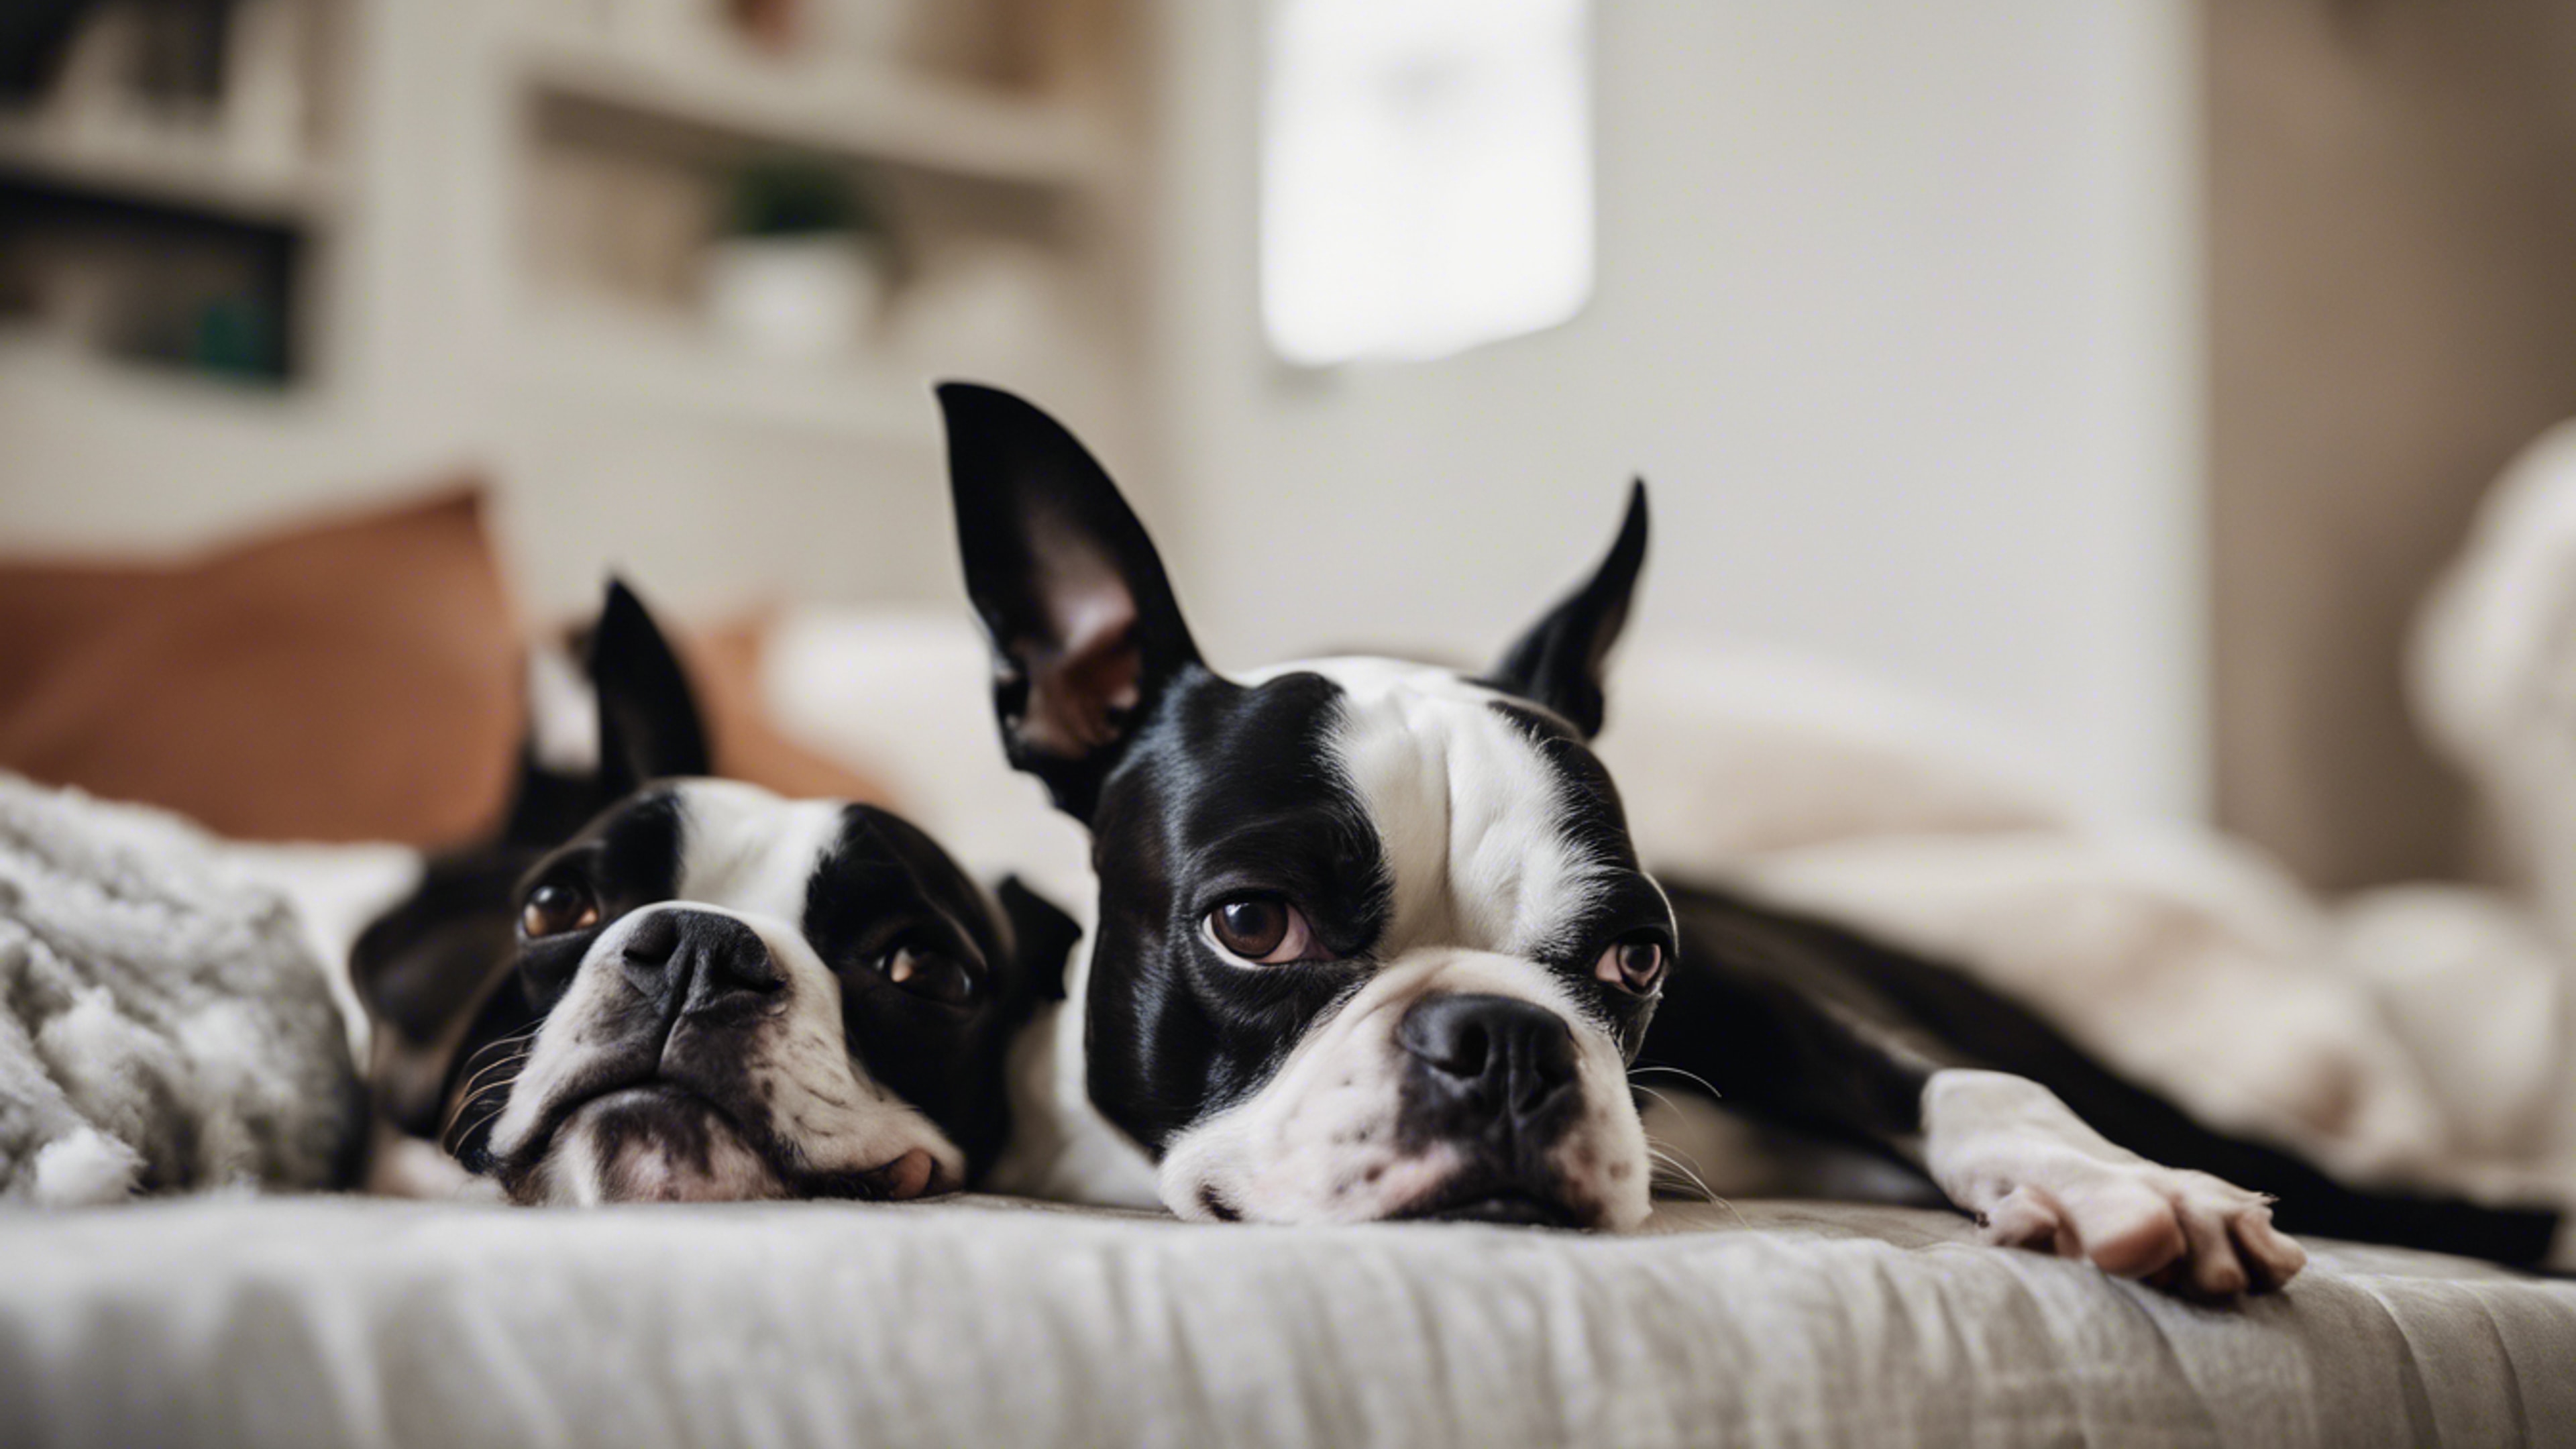 Two Boston Terriers laying comfortably on their sides, dozing away the afternoon in a suburban home. 벽지[f1fad920e9554f308ac1]